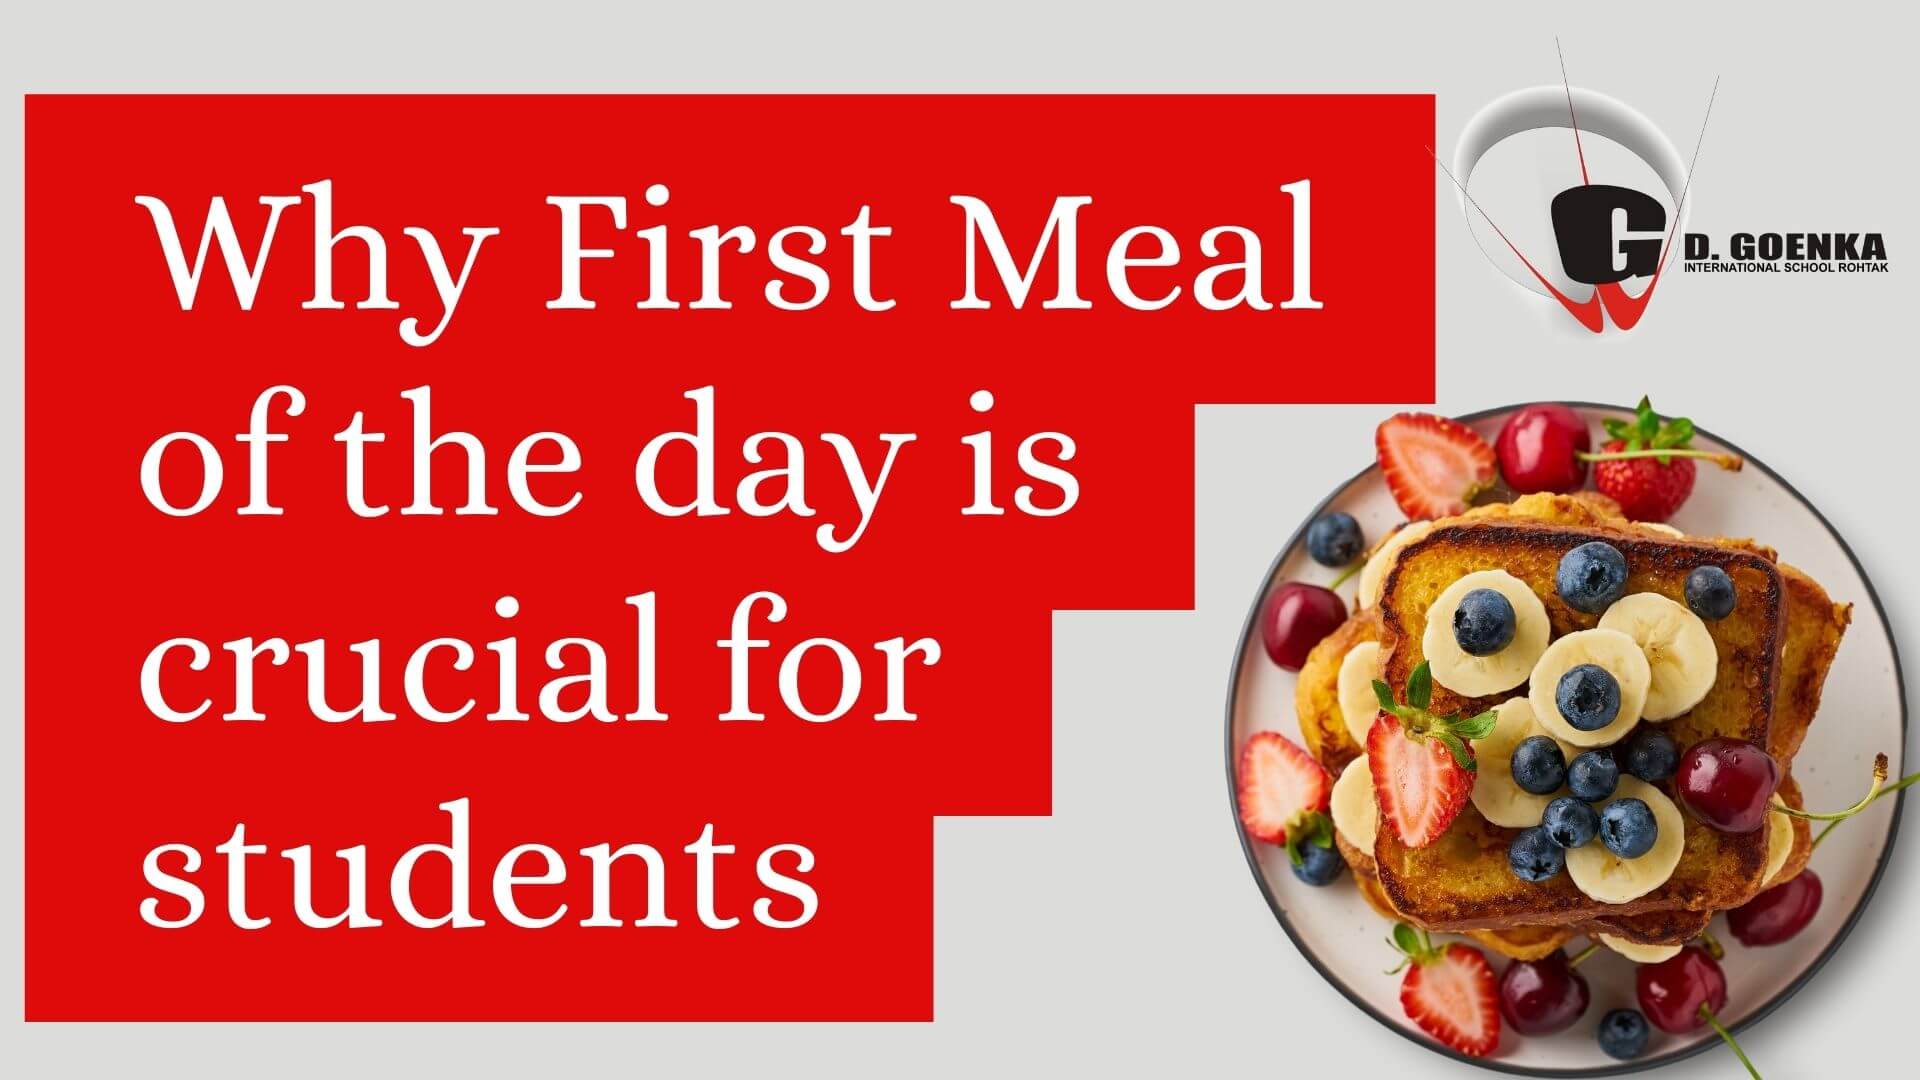 Why First Meal of the day is crucial for students